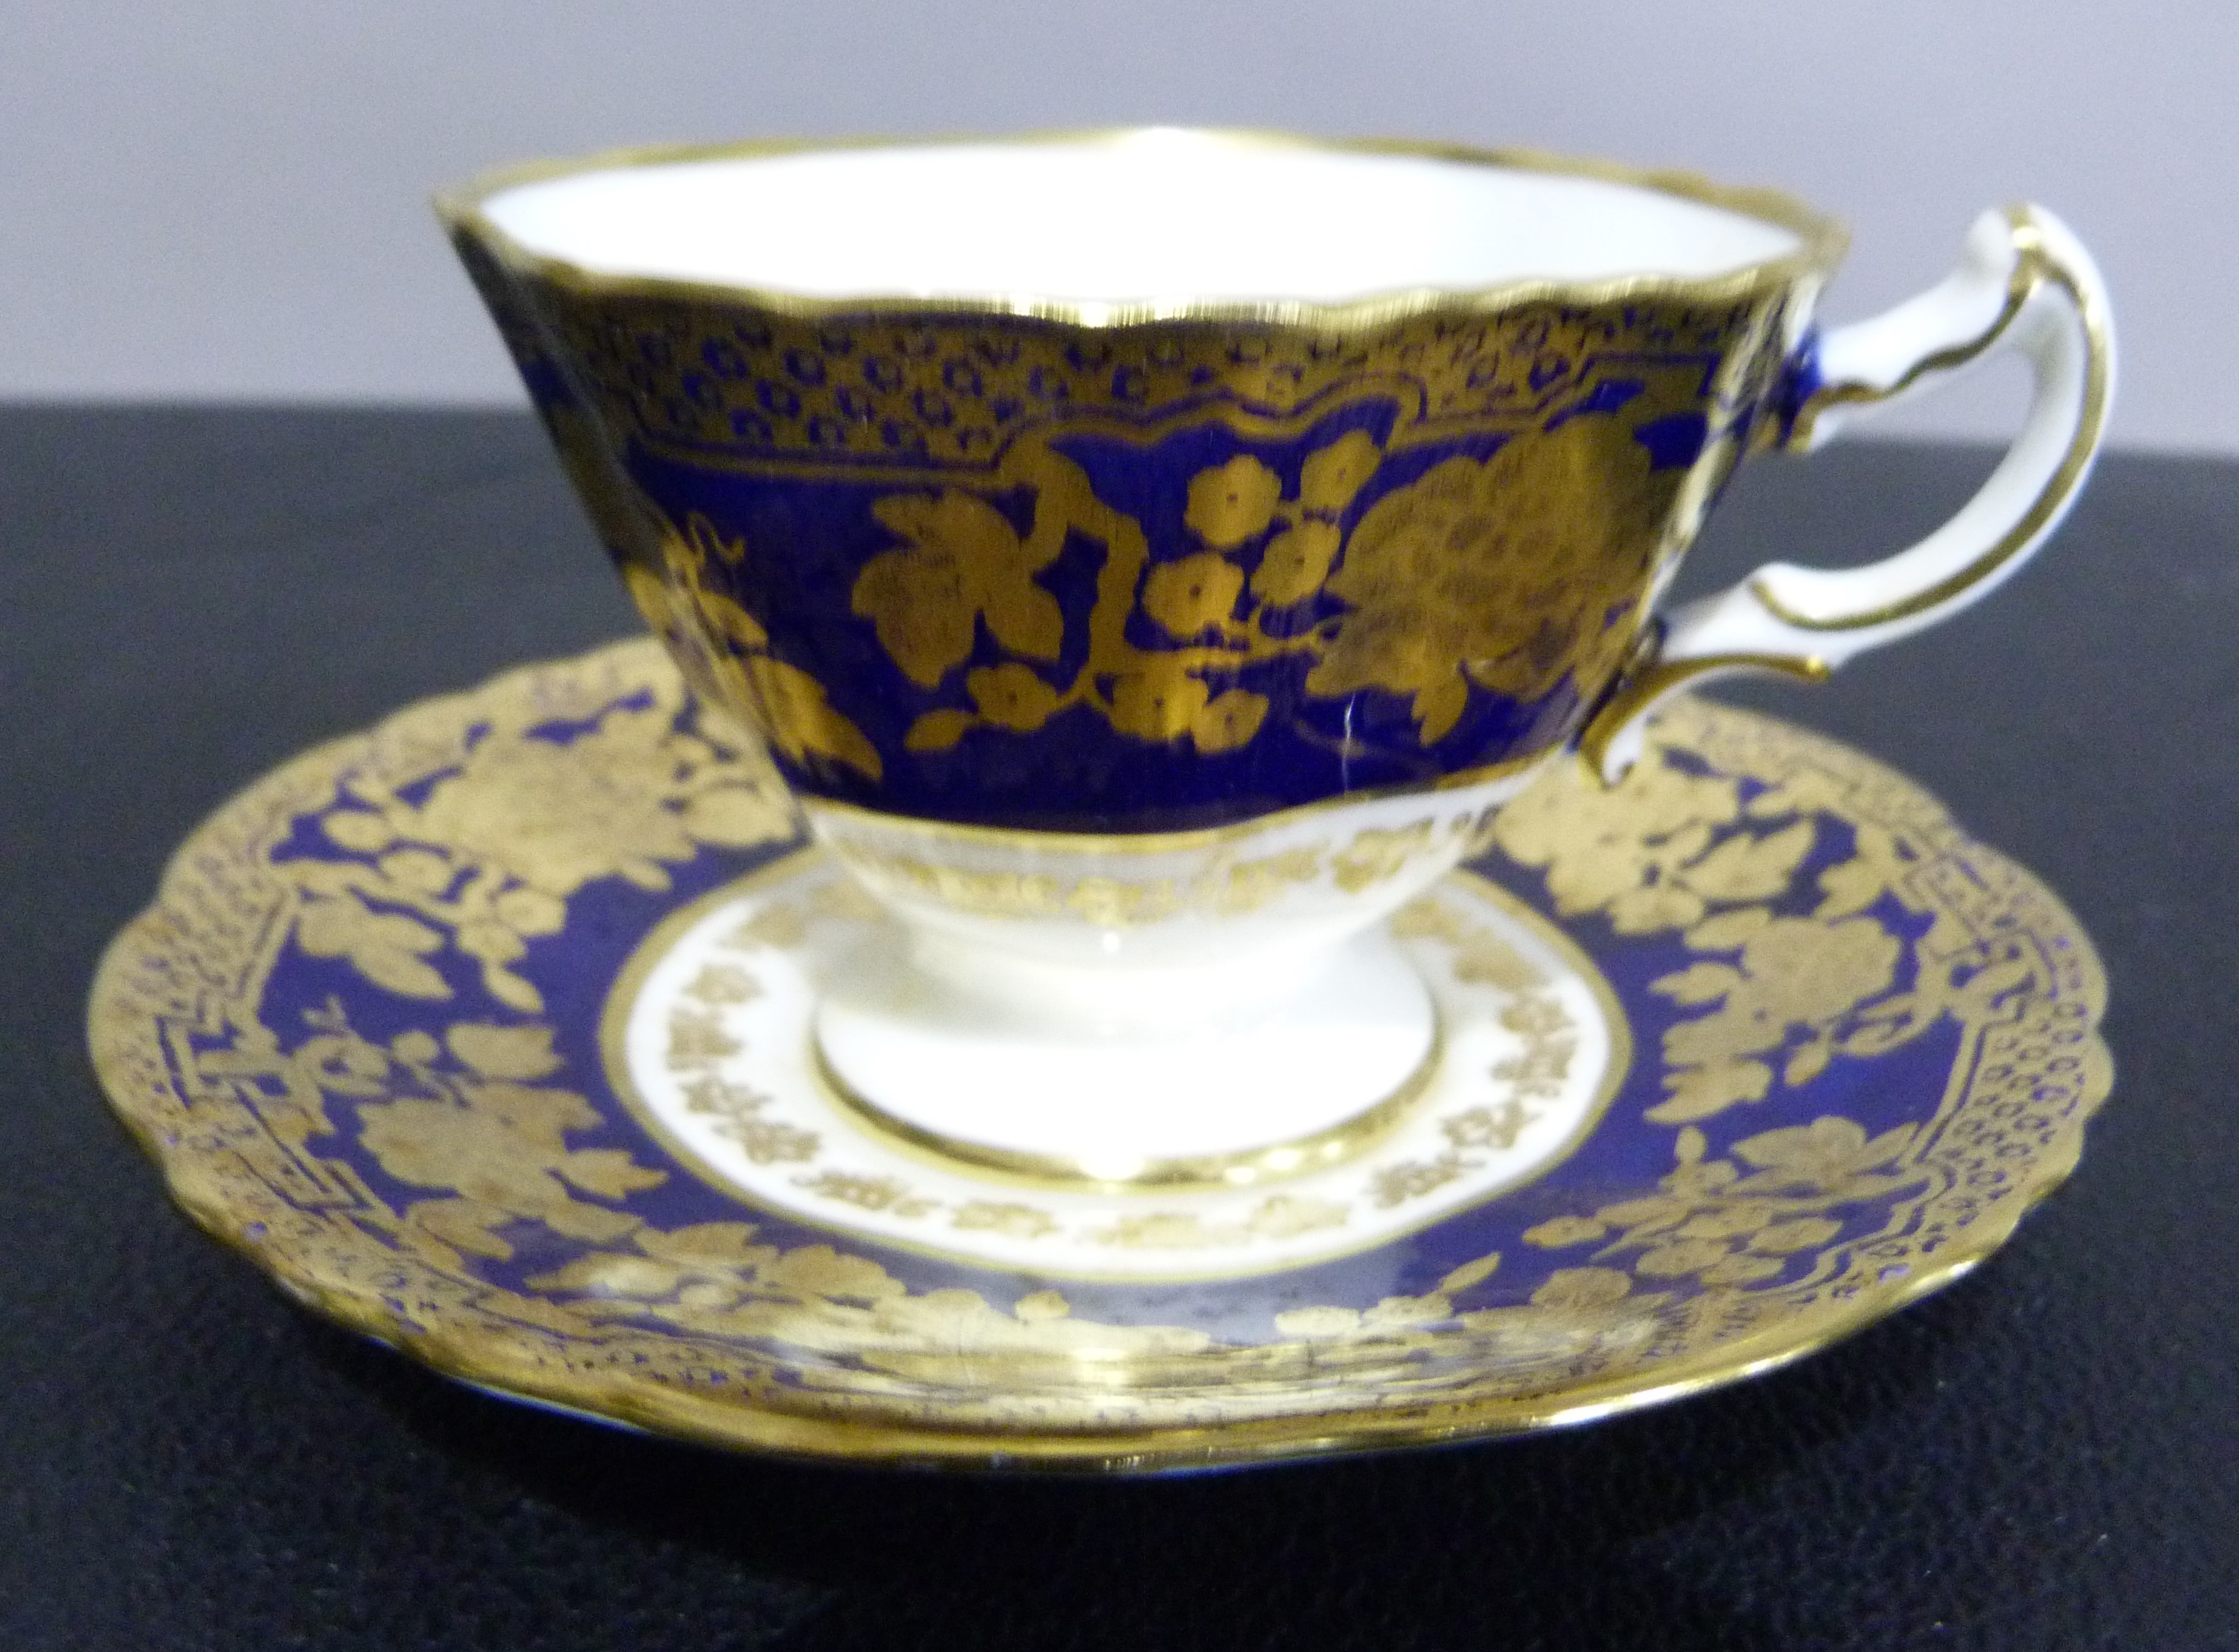 A set of six Hammersley china tea cups and saucers decorated in dark blue and gilt on a white - Image 2 of 9